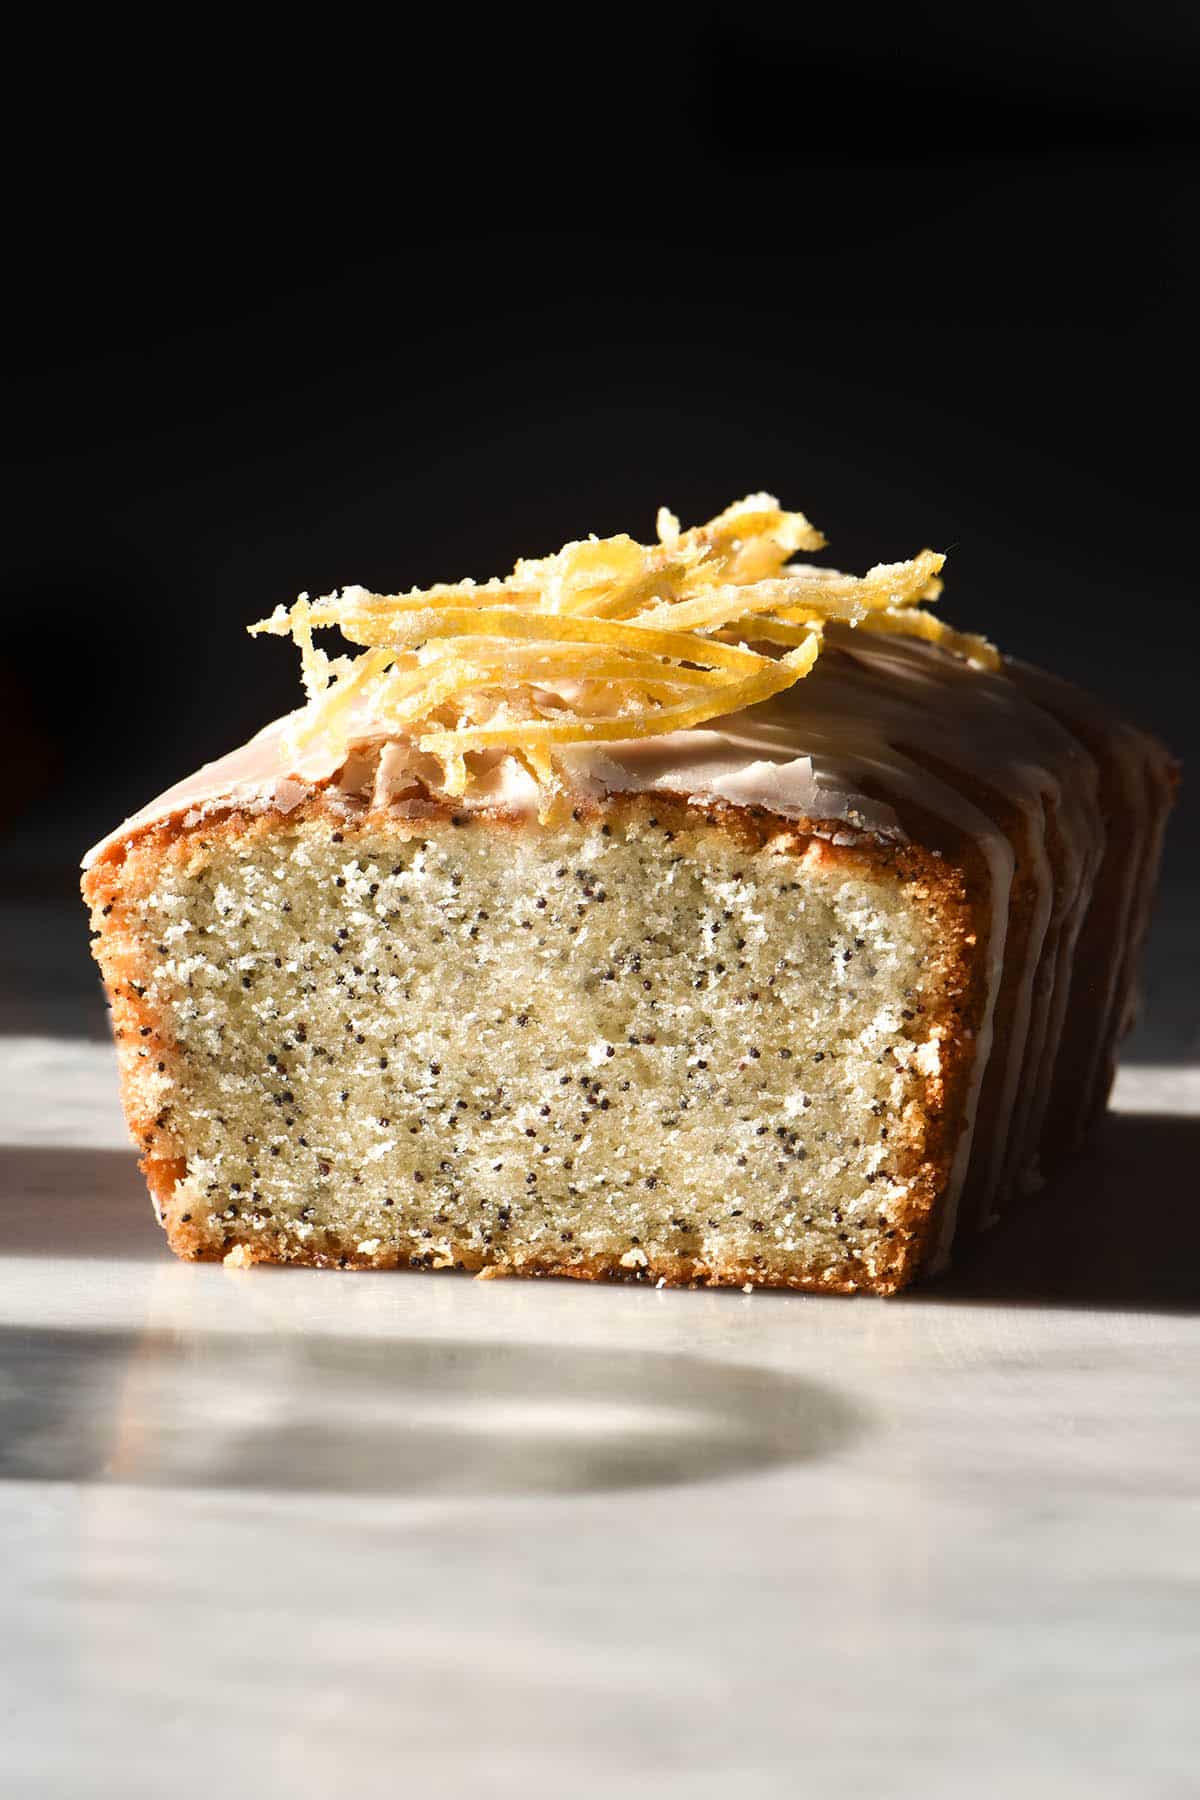 A side on view of a gluten free lemon poppyseed loaf topped with lemon icing and candied lemon. The loaf sits on a white marble table against a dark backdrop